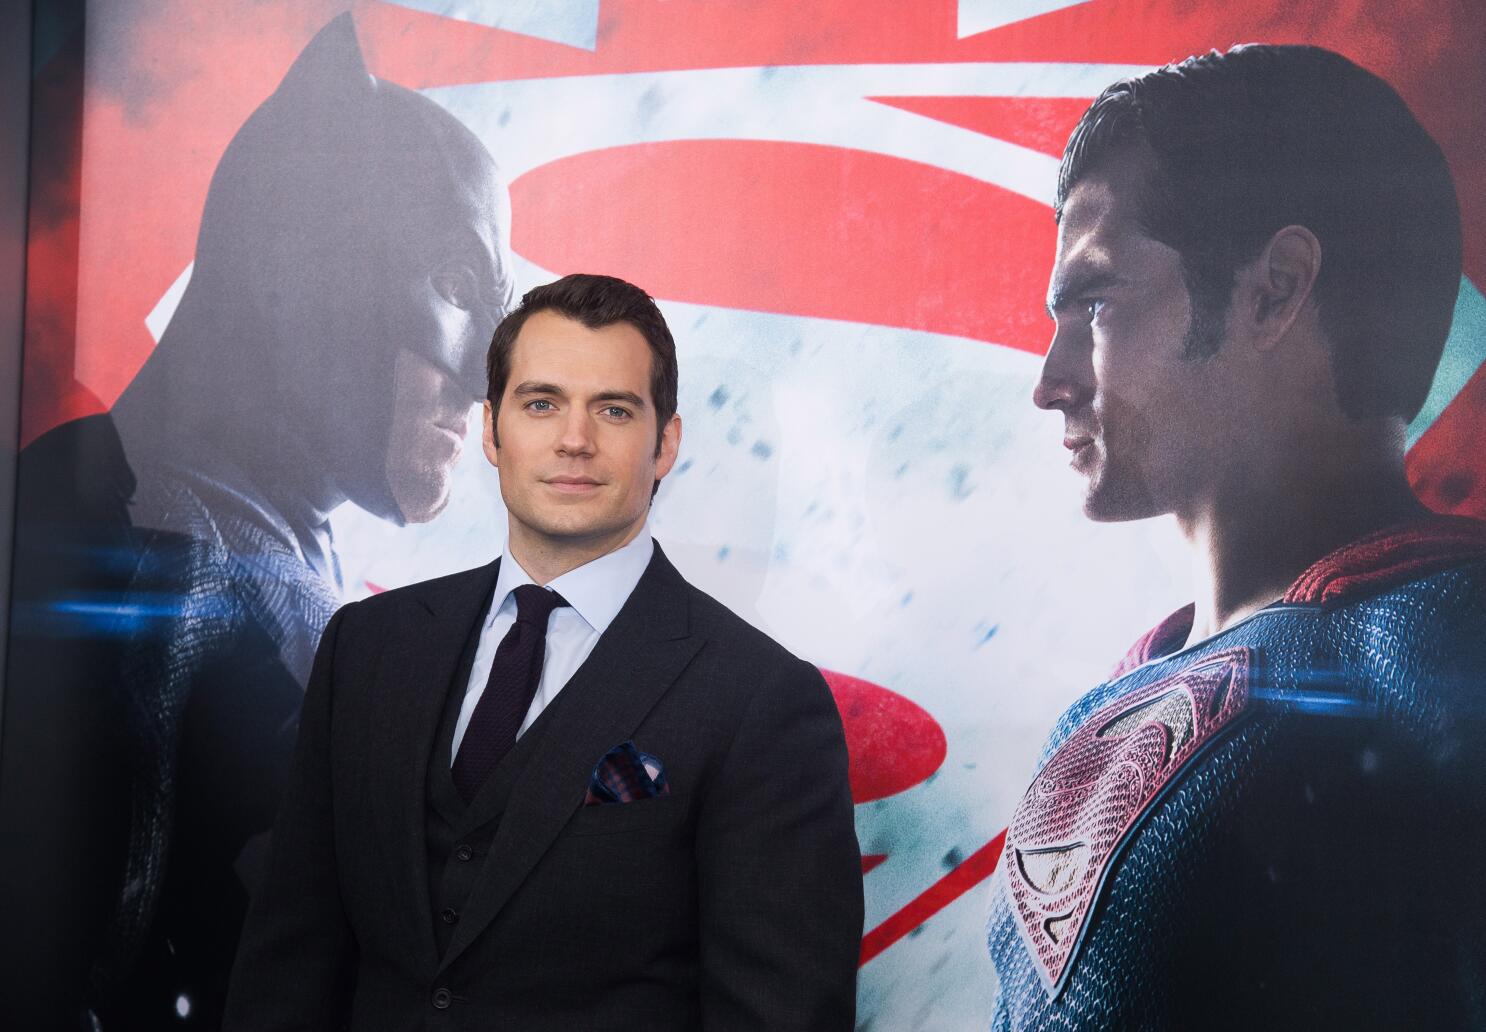 Henry Cavill Will Not Reprise Superman Role: Report